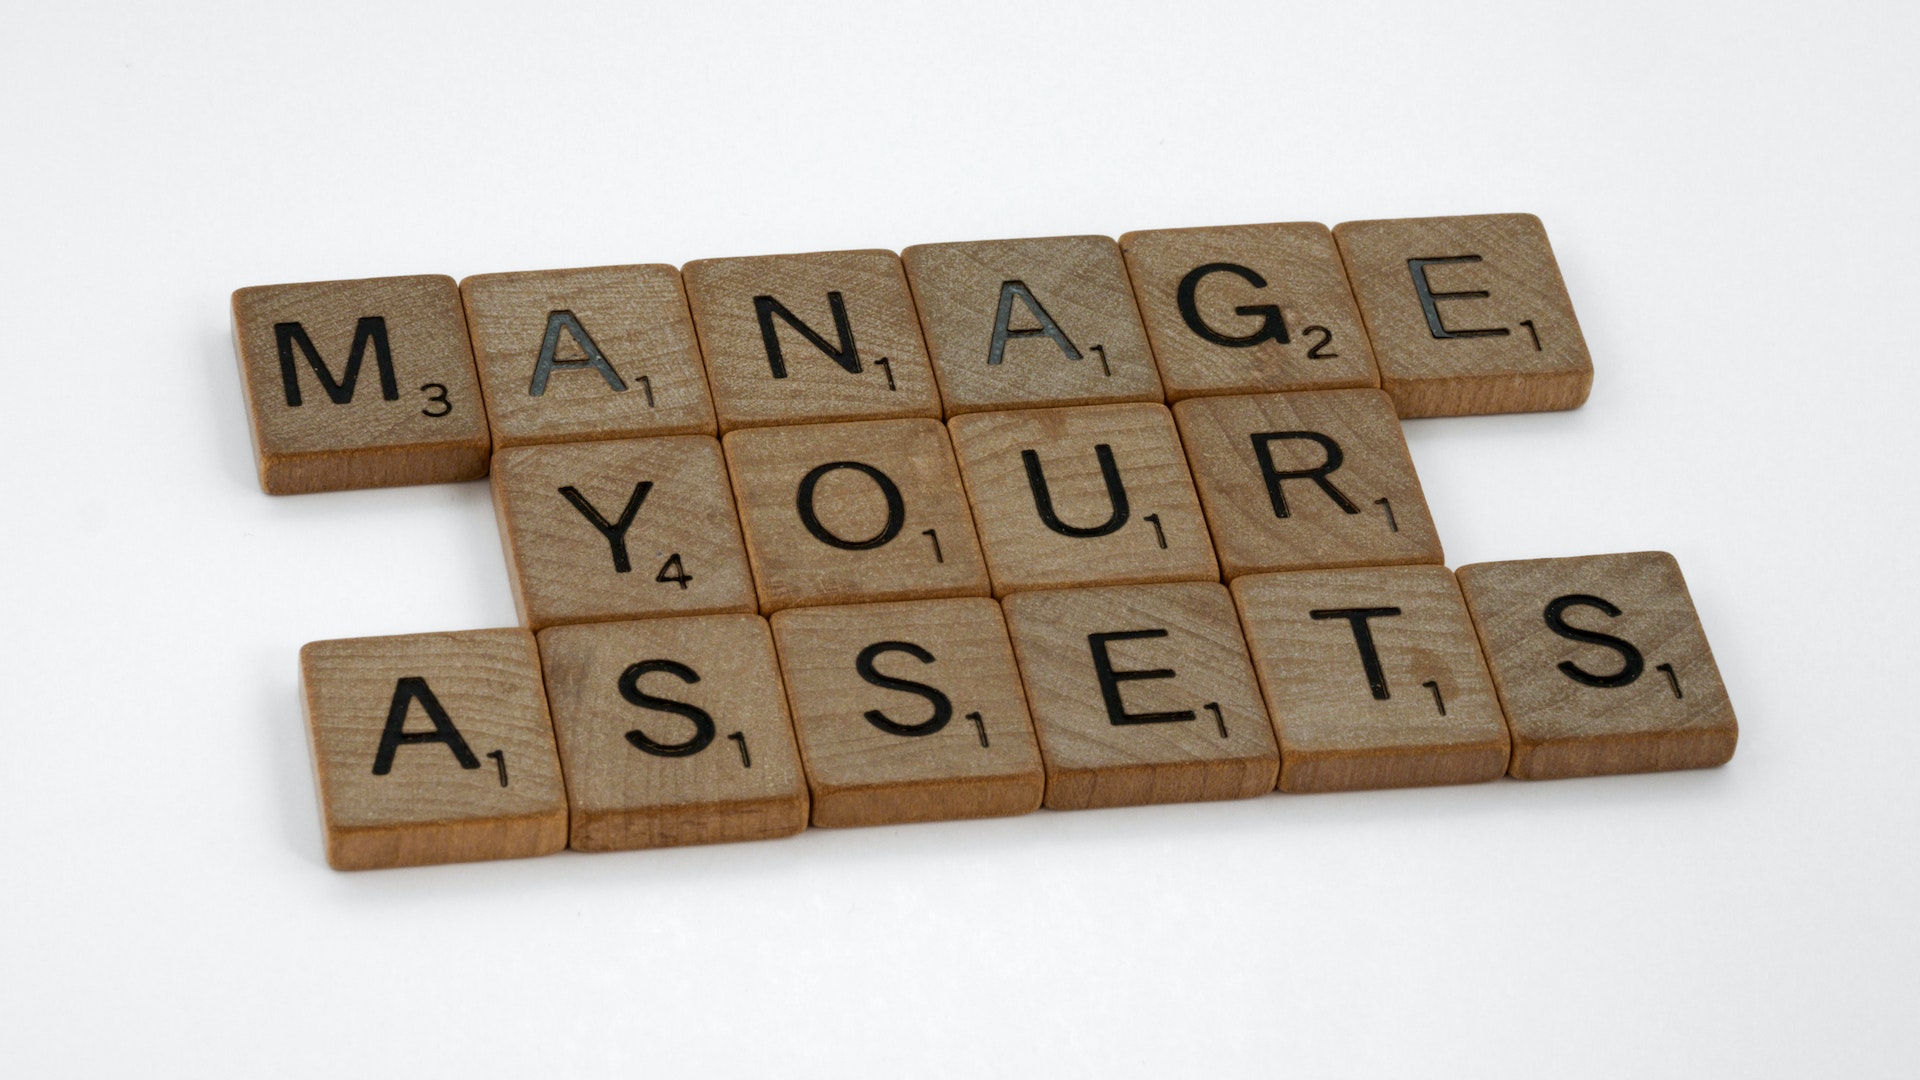 Introduction to Asset Management